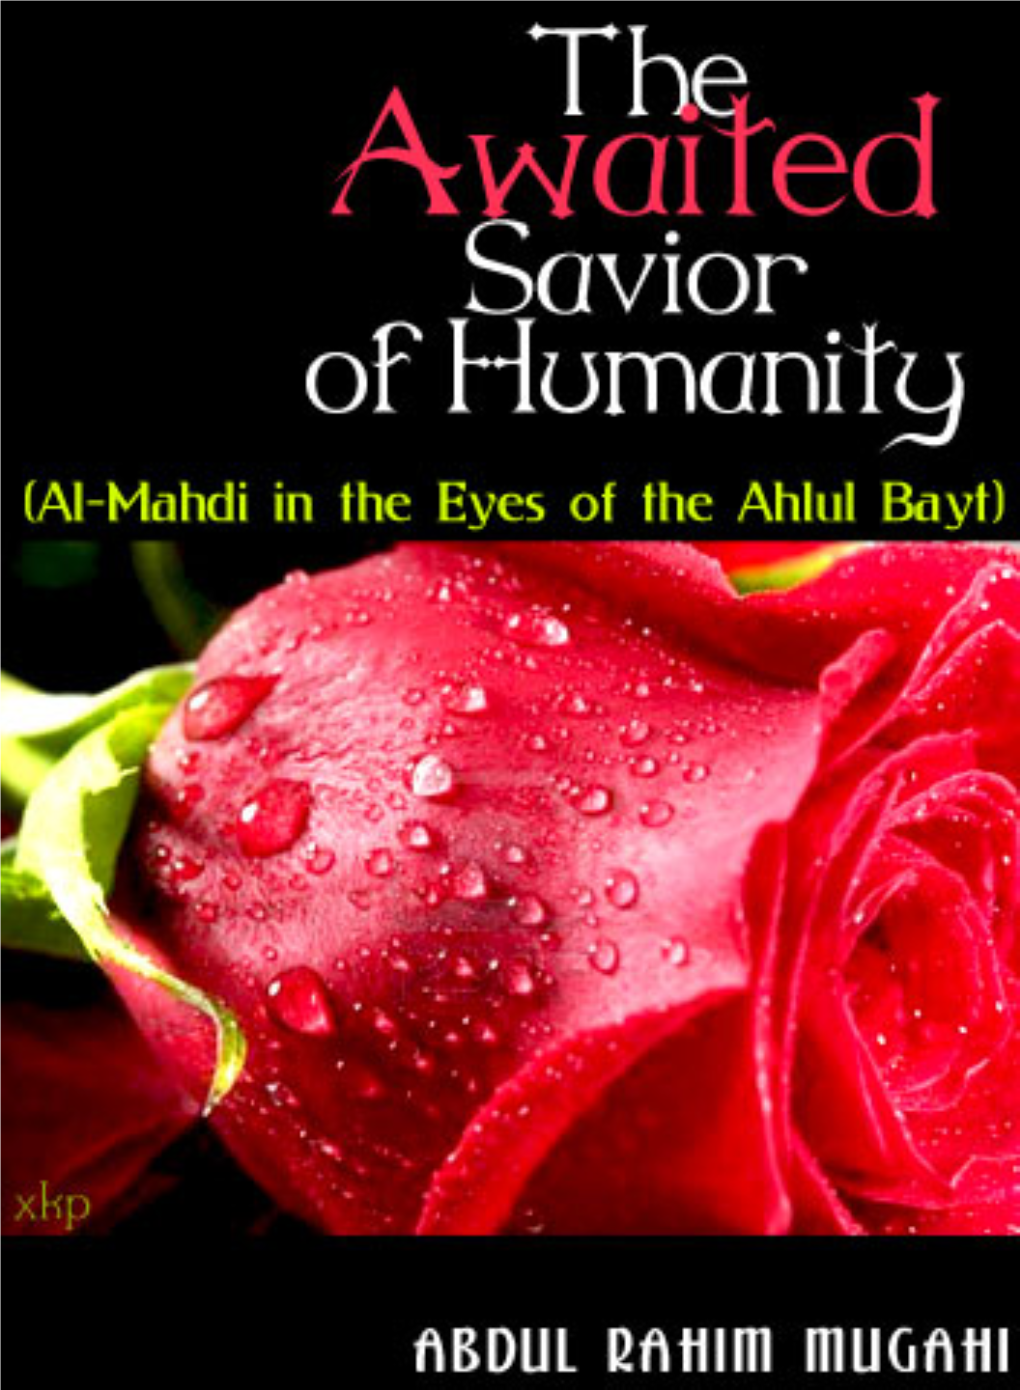 The Awaited Savior of Humanity (Al-Mahdi in the Eyes of the Ahlul